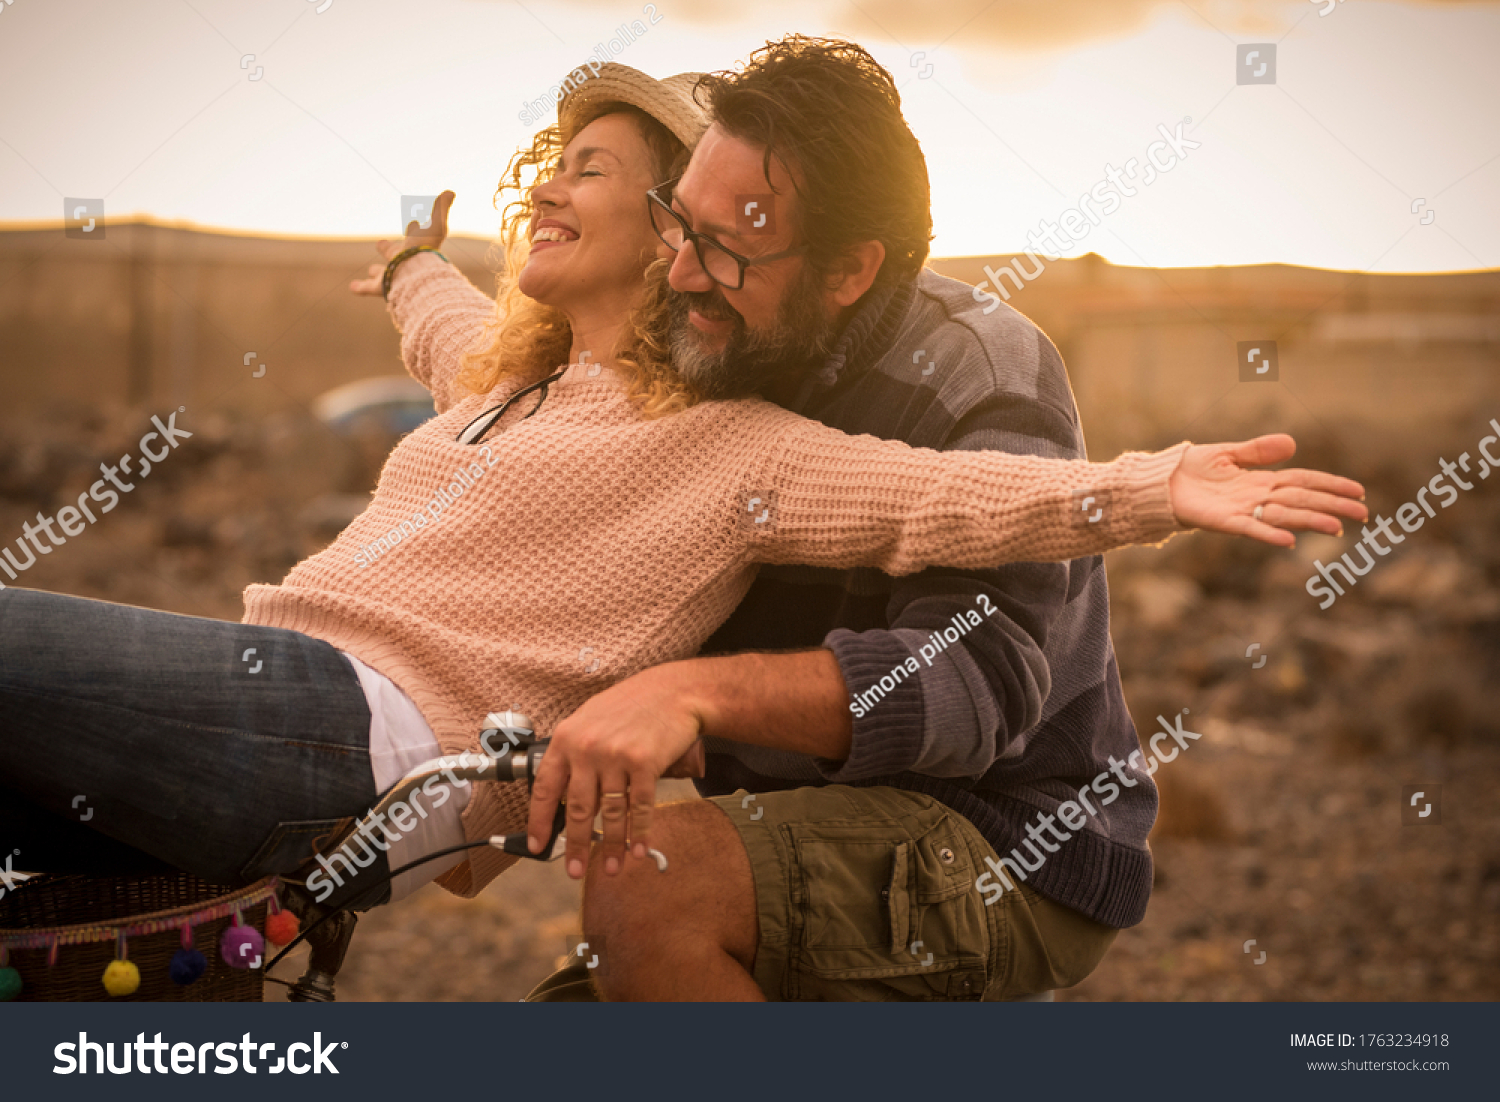 Happy adult people cheerful couple enjoy the outdoor leisure activity riding a bike together man carrying woman and laugh a lot in friendship and relationship - active youthful persons #1763234918